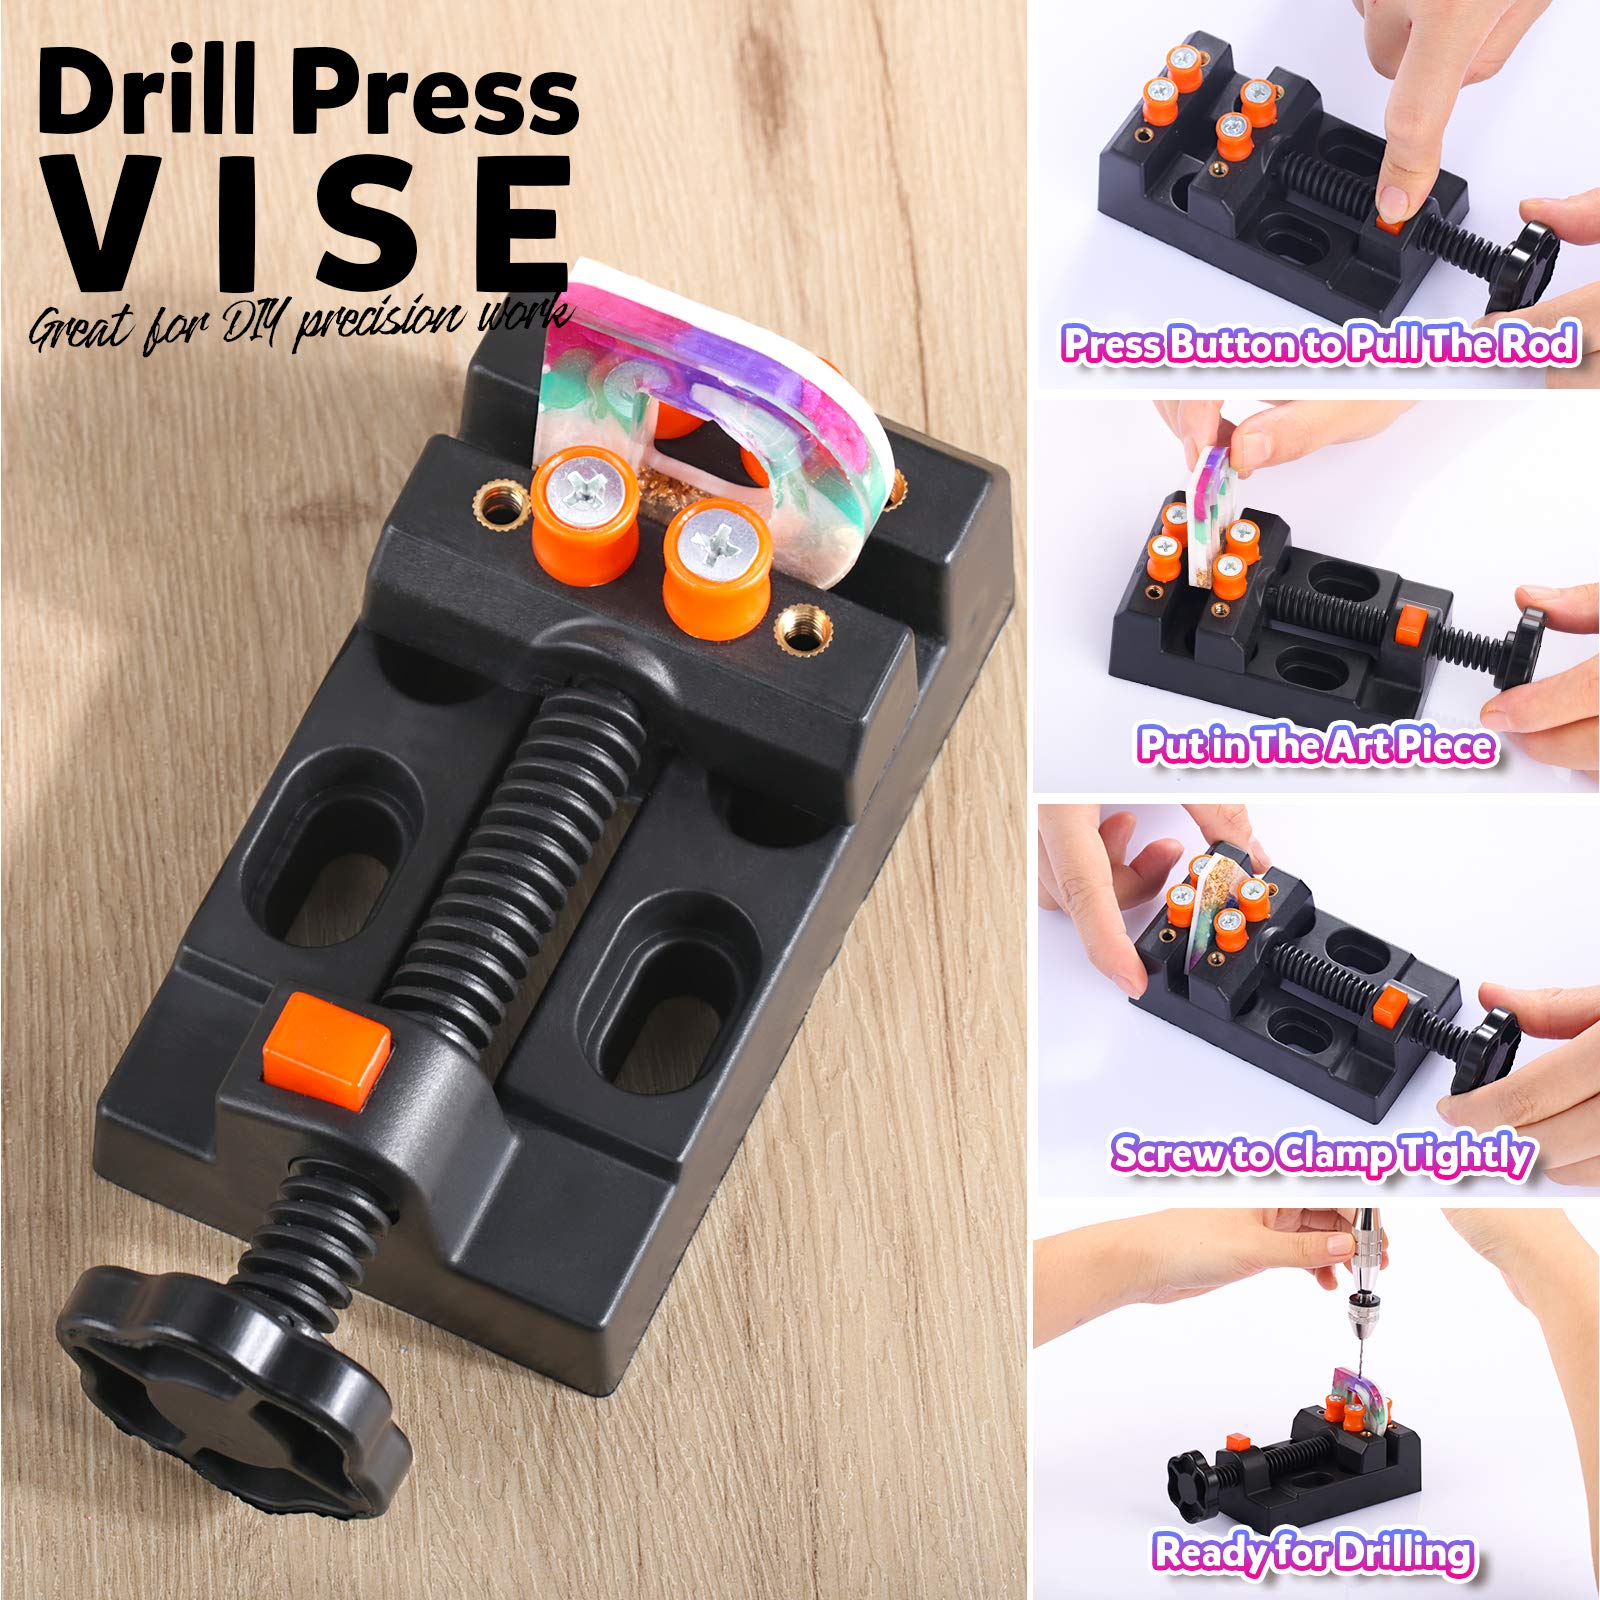 LEOBRO Hand Drill, Pin Vise Hand Drill for Jewelry Making, Mini Drill with Small Drill Bits, Drill Press Vise, 210pcs Keychain Making Supplies, Resin Tools for Jewelry Keychains Miniature Crafts